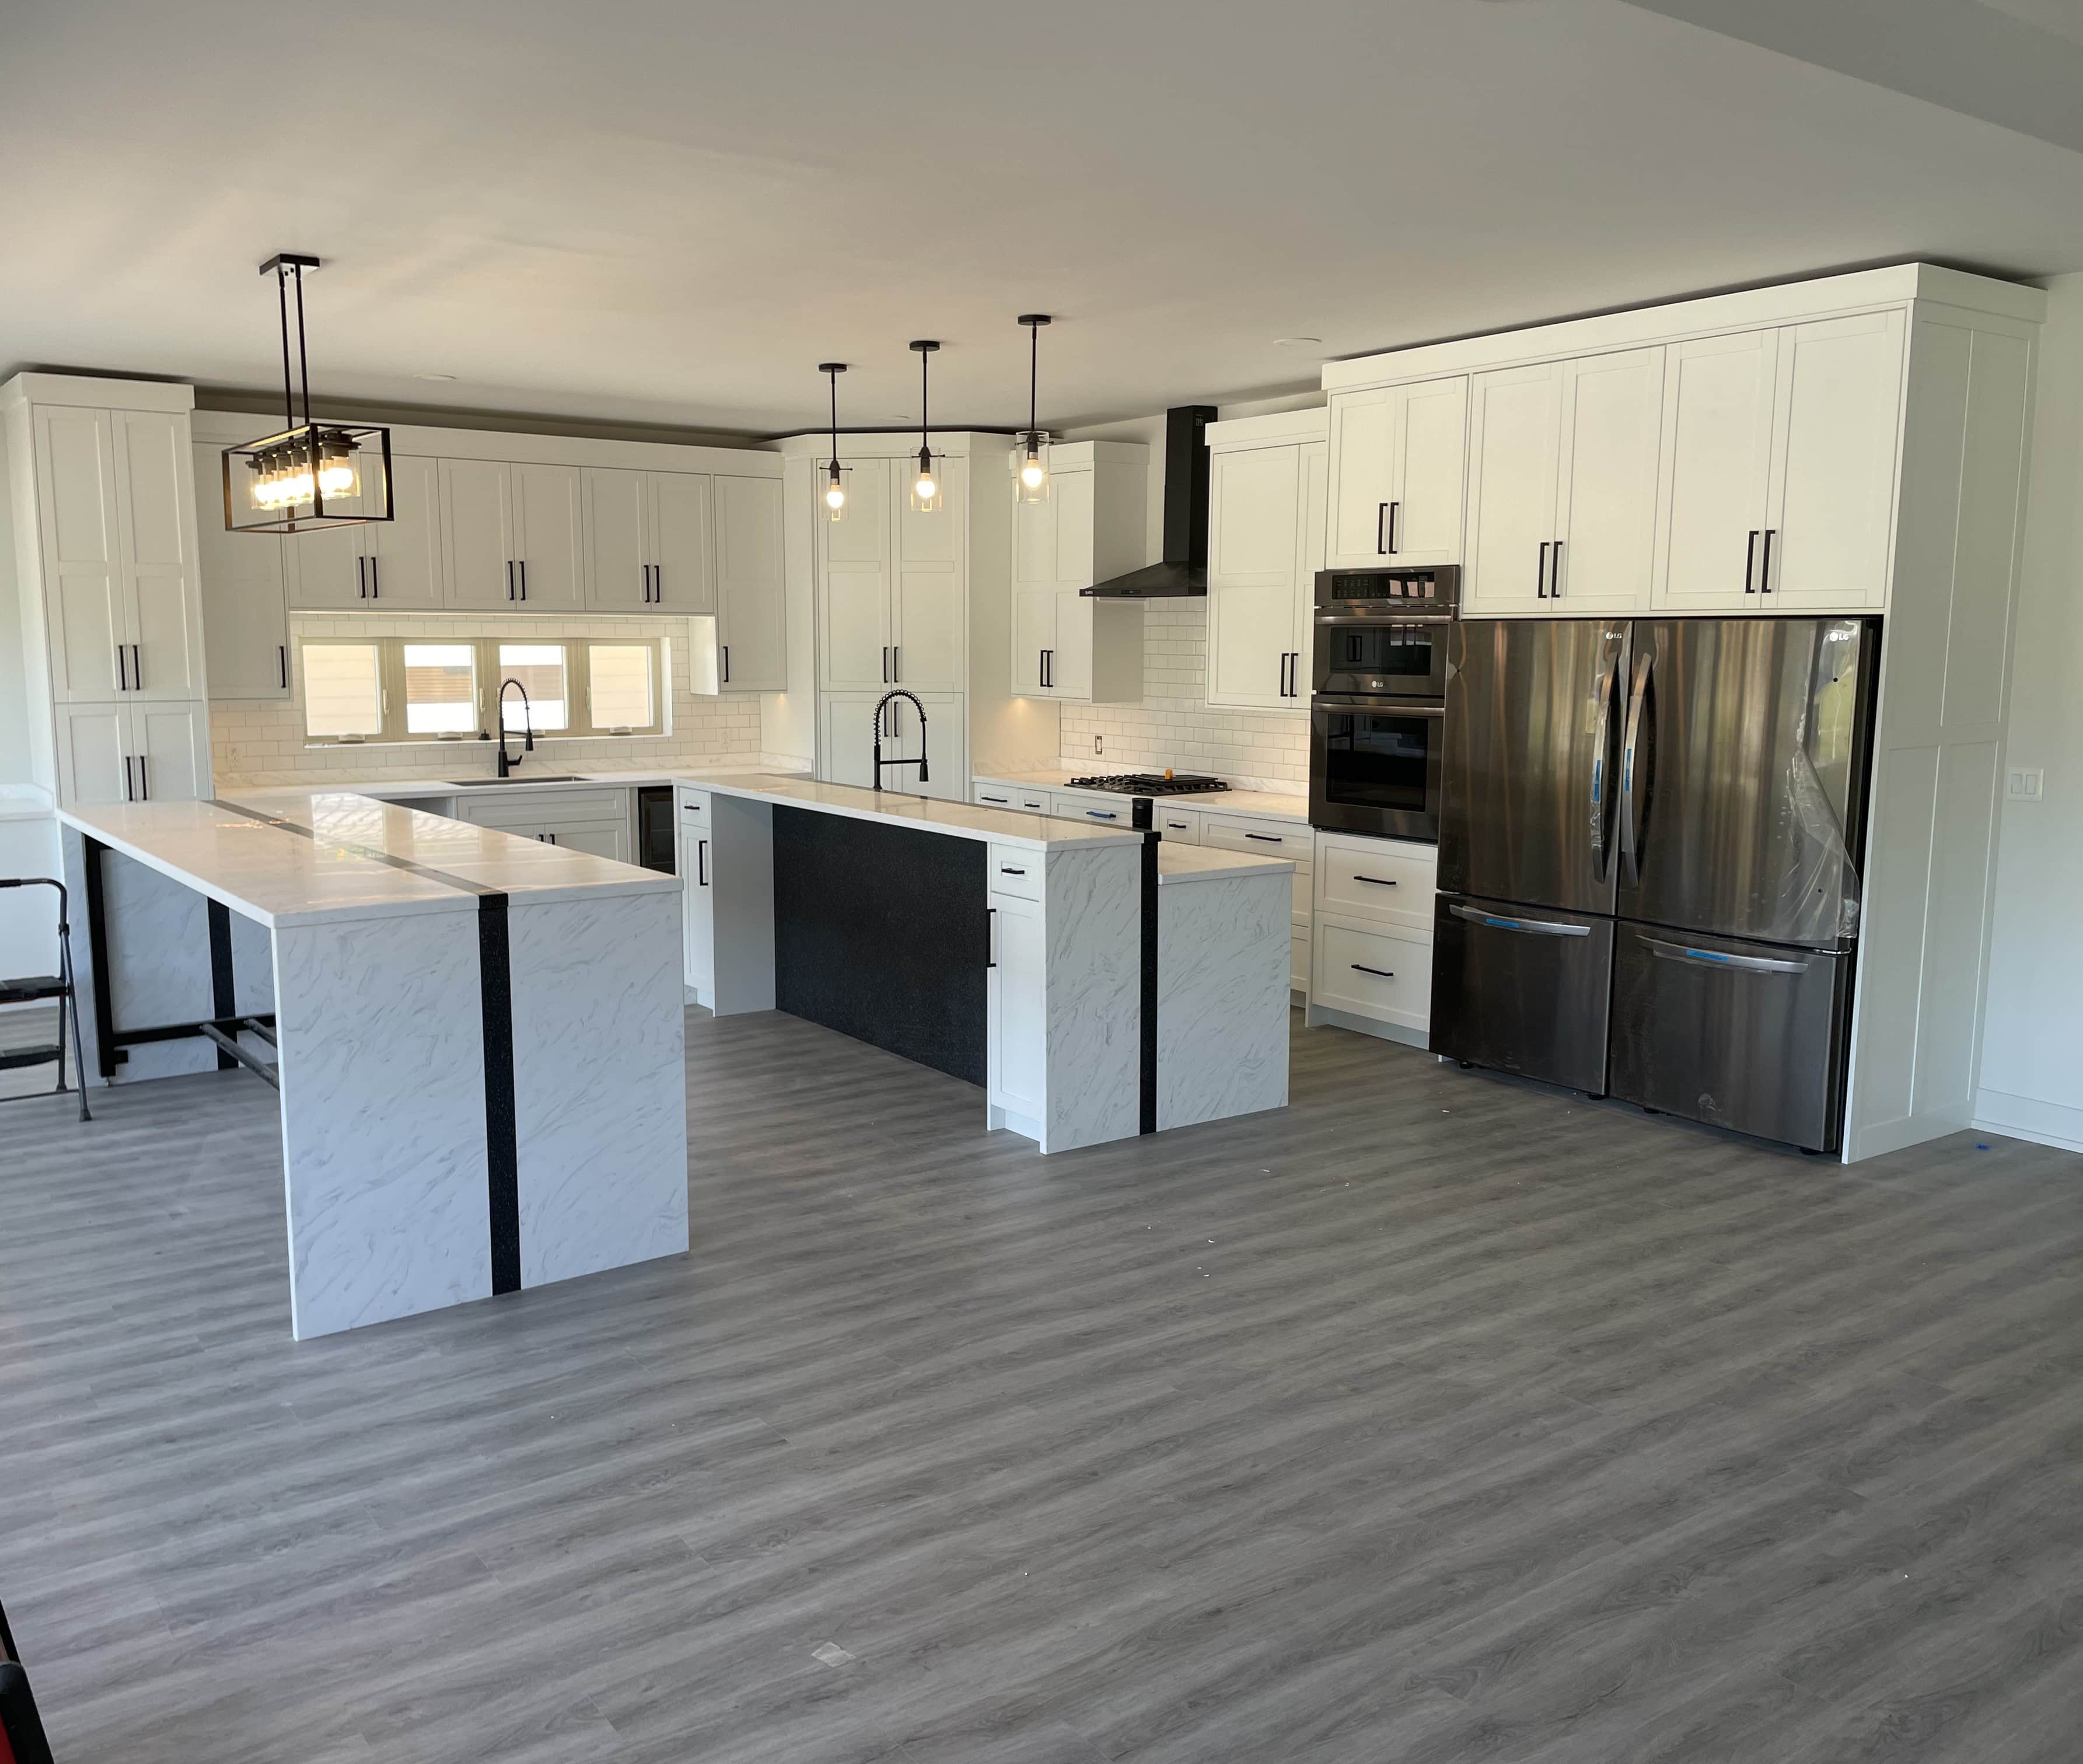 Indianapolis IN Custom Kitchen Cabinets